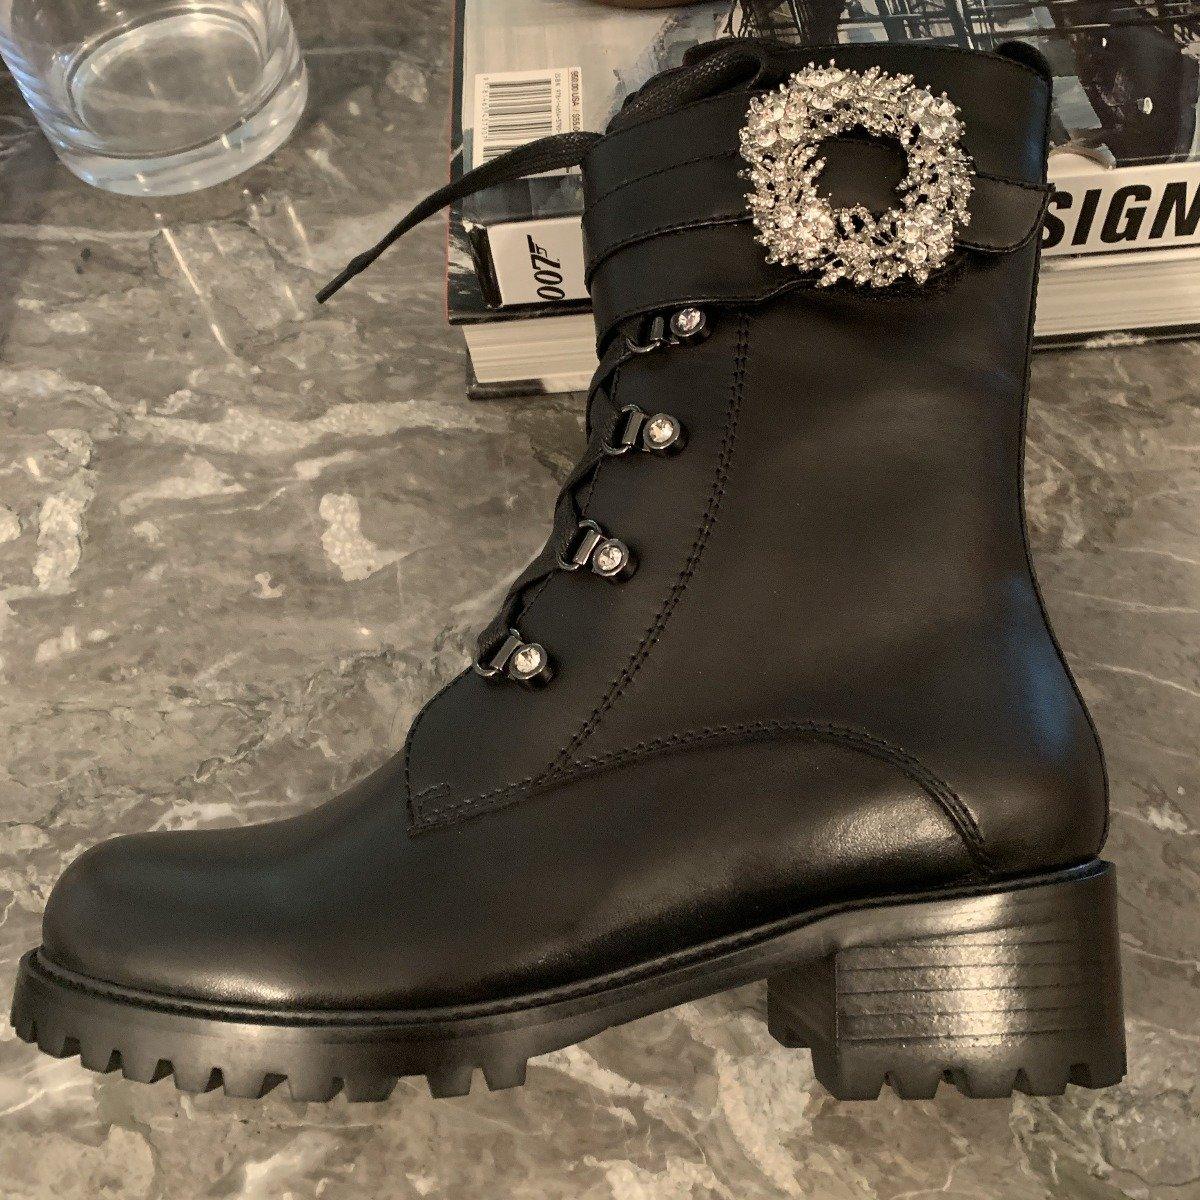 Black combat boots with lace-up design  